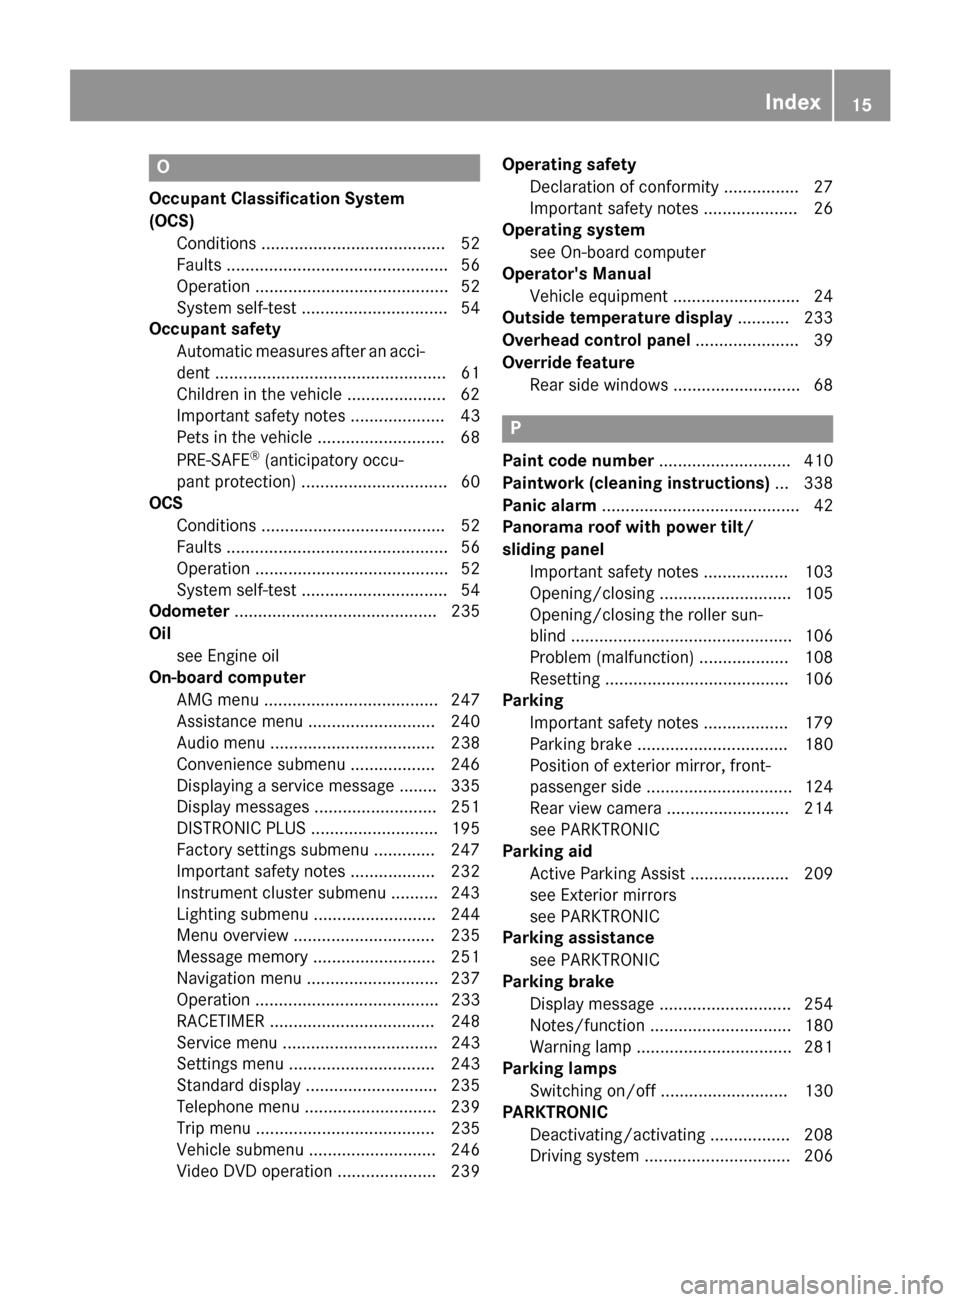 MERCEDES-BENZ WAGON 2015 S212 Owners Manual O
Occupant Classification System
(OCS) Conditions ....................................... 52
Faults ............................................... 56
Operation .......................................